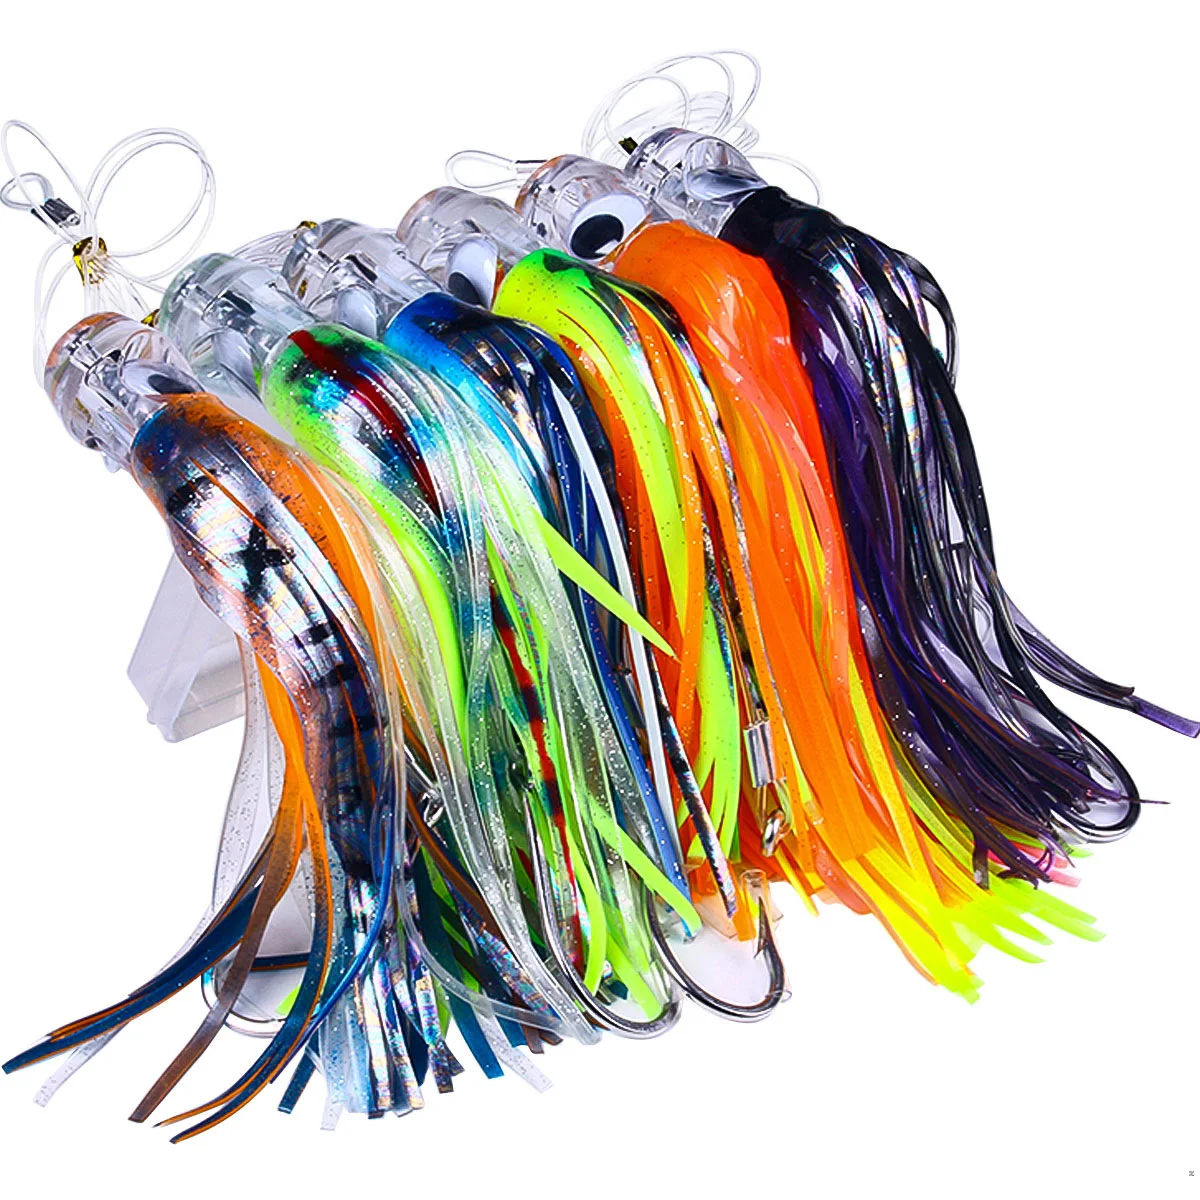 SB088 22cm 100g Tuna Luya Fishing Lure Bait Large Trolling Octopus Sea Subbait Whisker Squid Artificia Spinning Tackle 3D Fishs